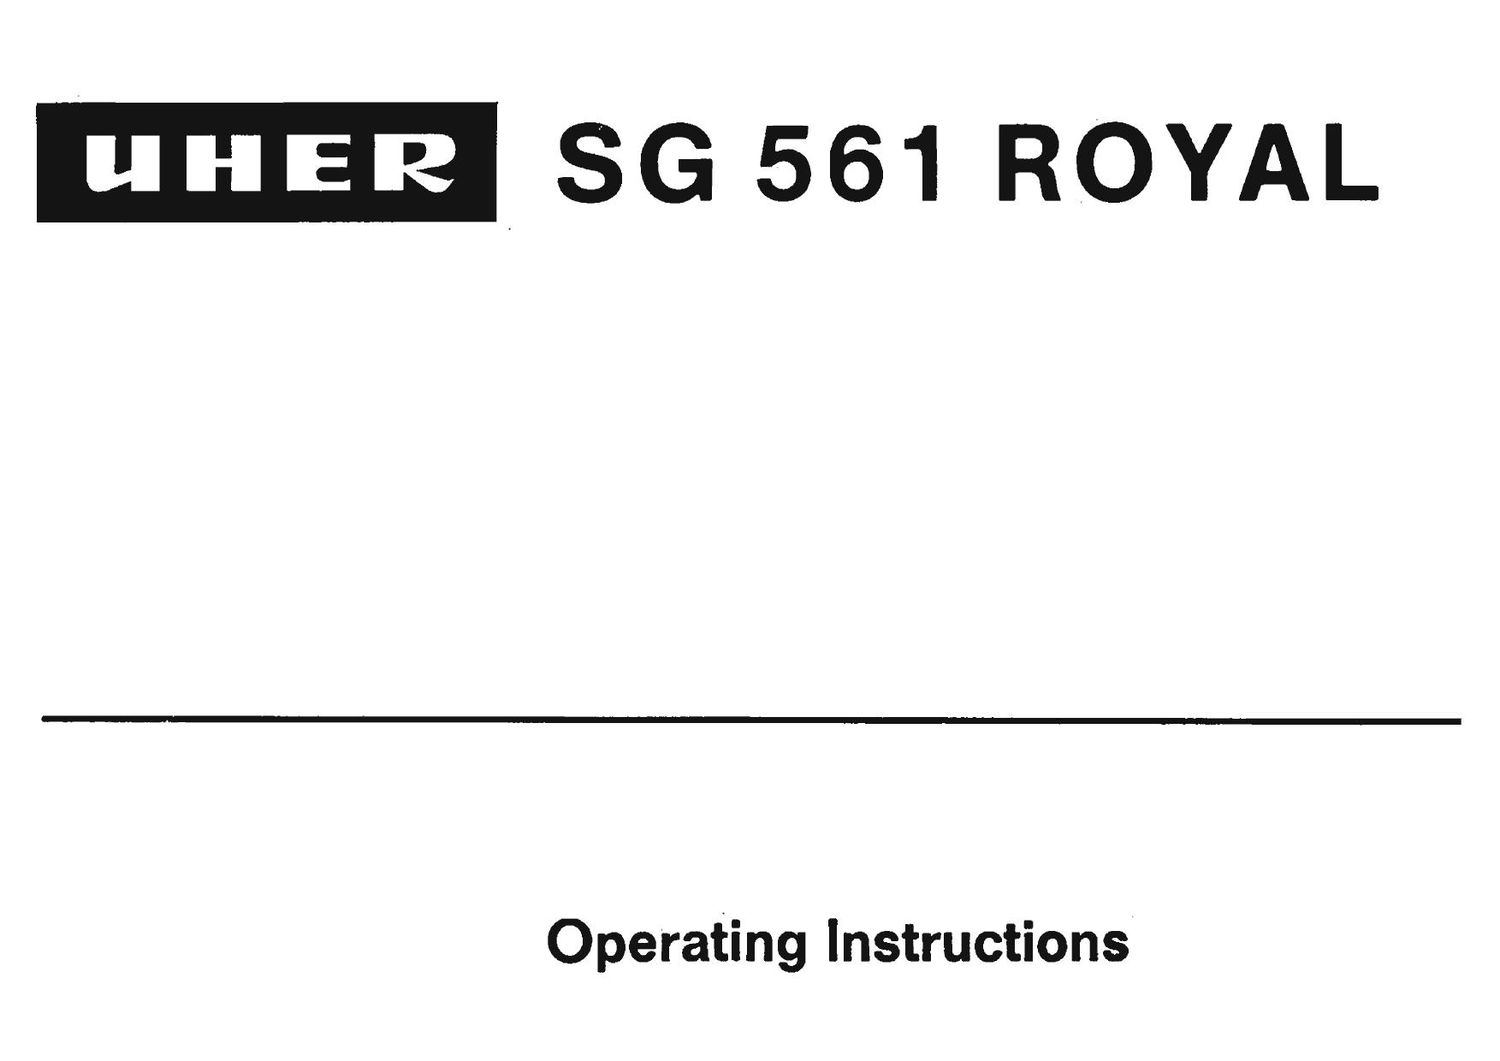 Uher SG 561 Royal Owners Manual